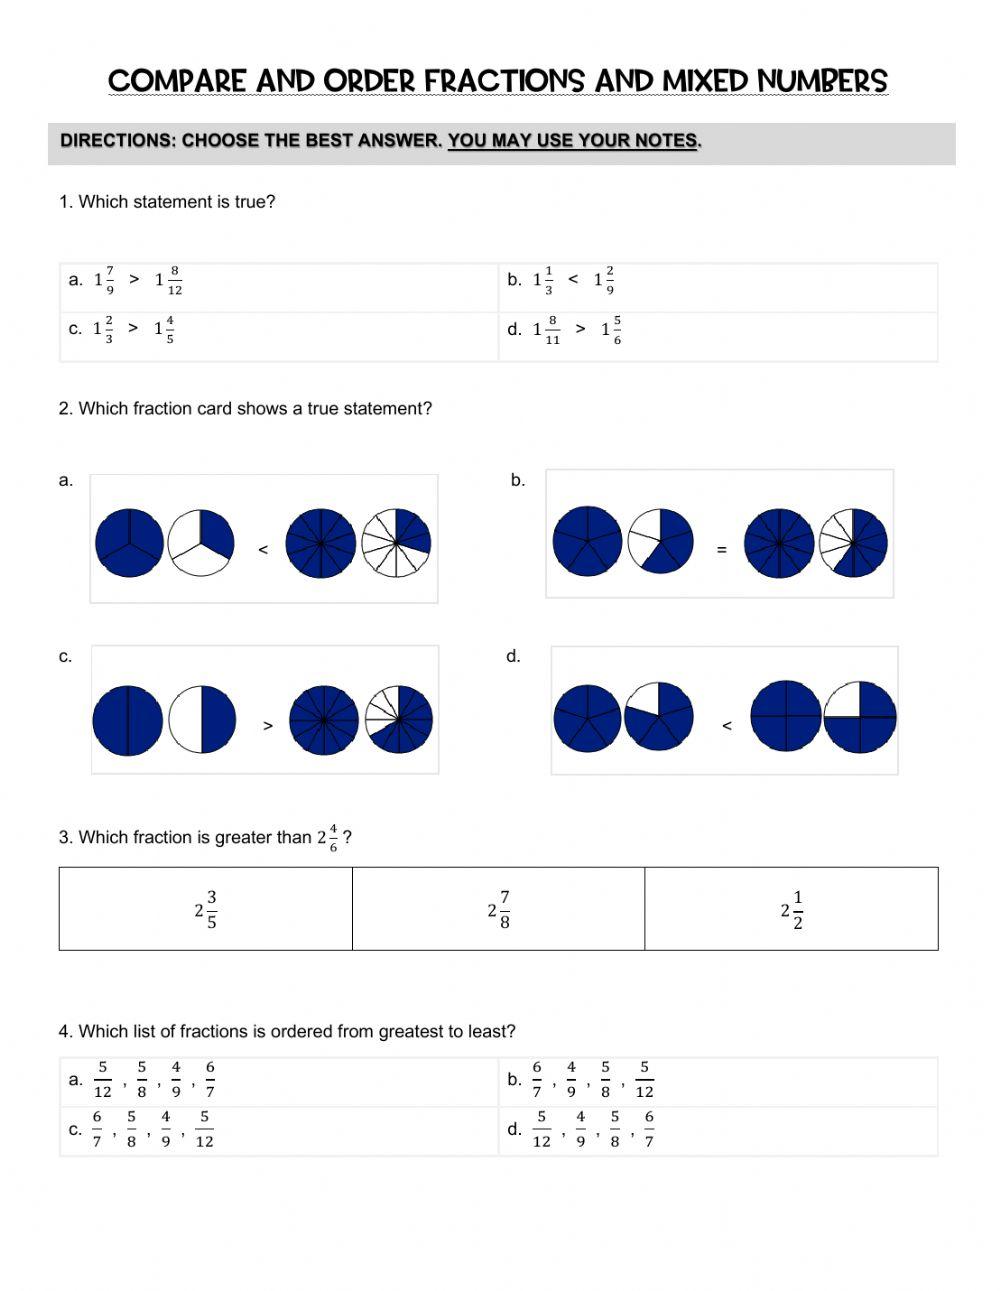 Compare and Order Fractions and Mixed Numbers